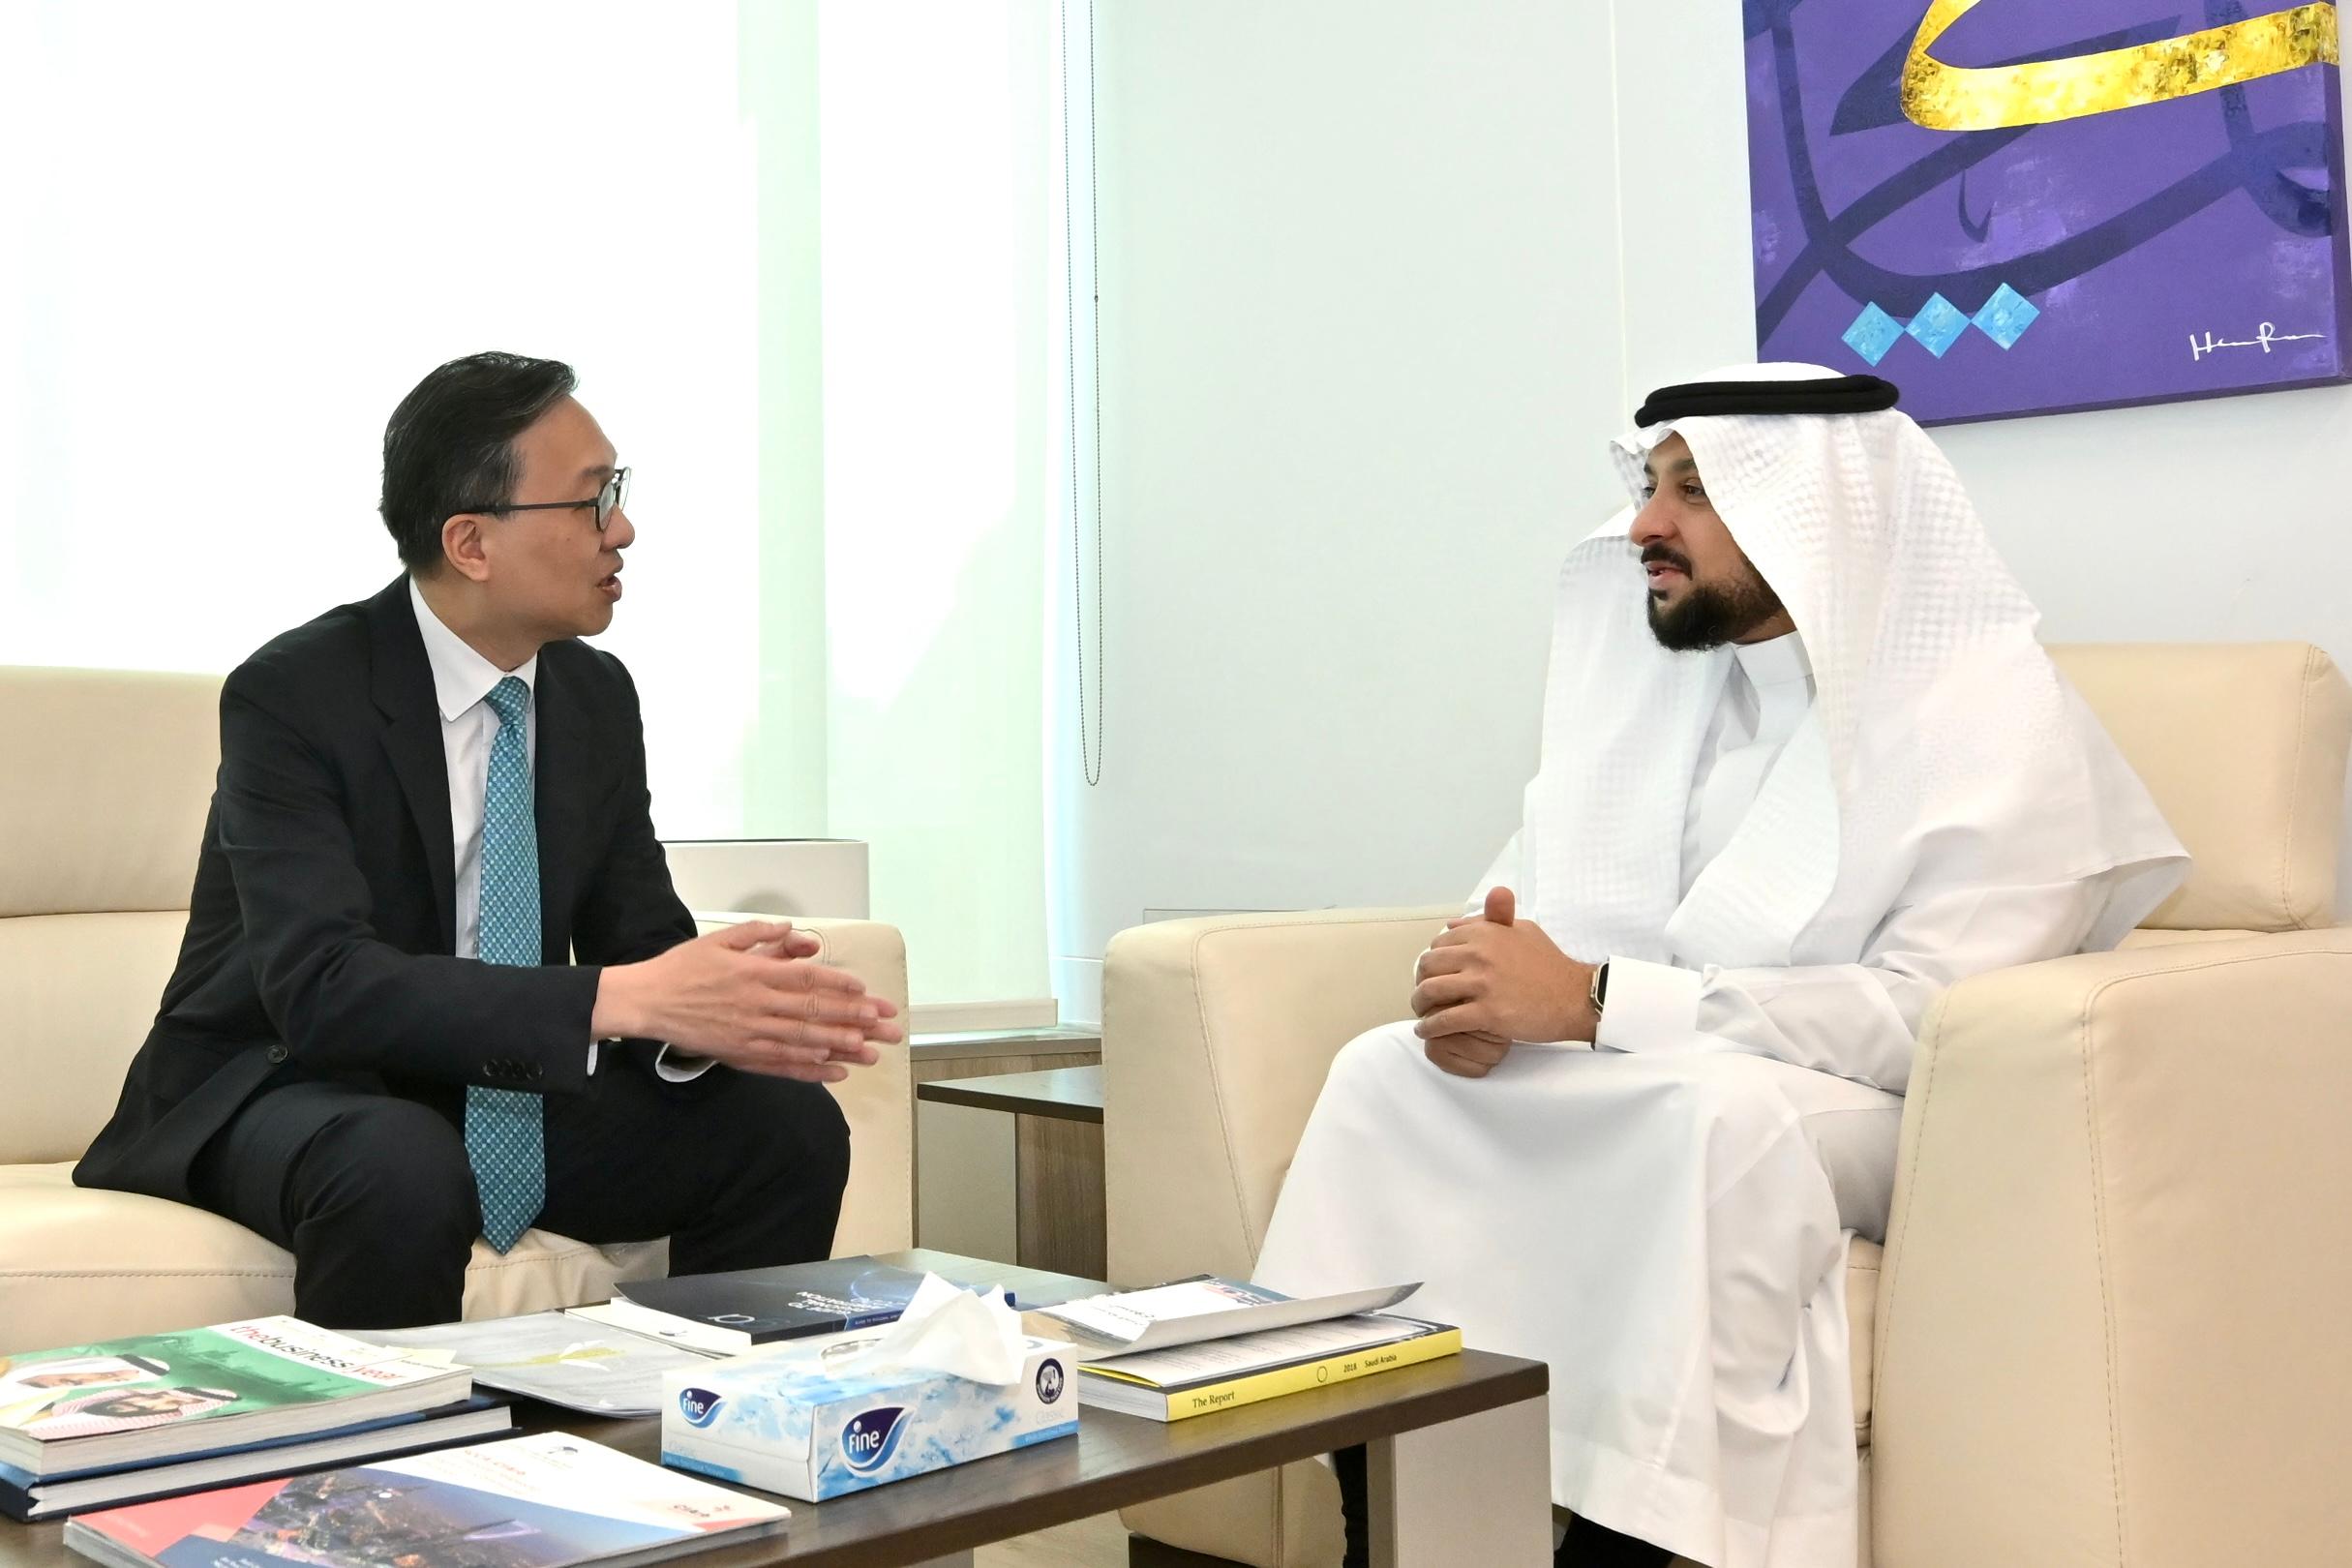 The Secretary for Justice, Mr Paul Lam, SC, continued his visit to Riyadh, Saudi Arabia, today (May 20, Riyadh time) with his about 30-person delegation, comprising representatives from the Law Society of Hong Kong, the Hong Kong Bar Association, the Hong Kong Exchanges and Clearing Limited, Invest Hong Kong and related sectors. Photo shows Mr Lam (left) meeting with the Chief Executive Officer of the Saudi Center for Commercial Arbitration, Dr Hamed Merah (right).
